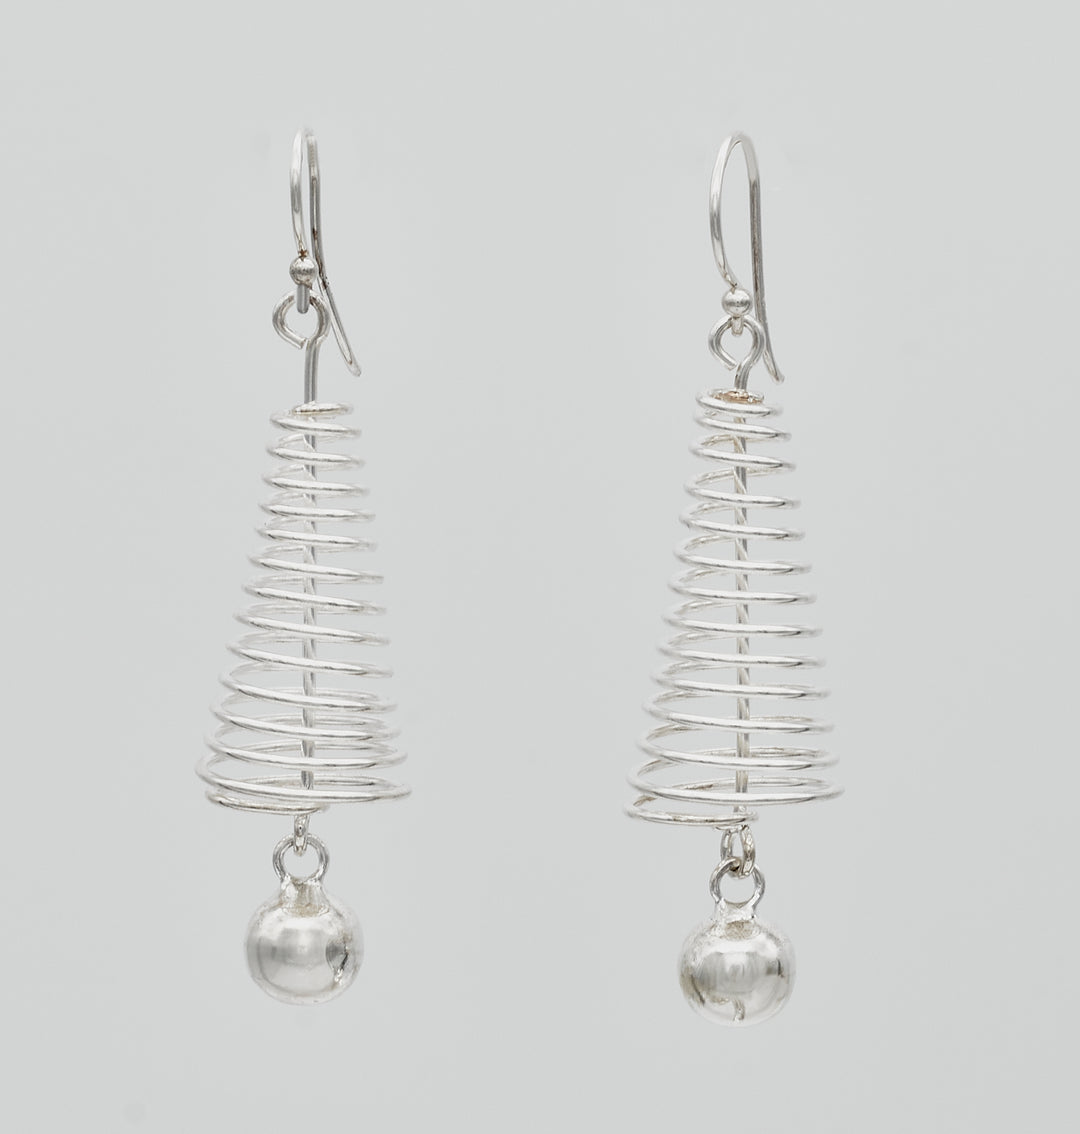 Coiled Silver Triangle Earrings with Dangle Bead